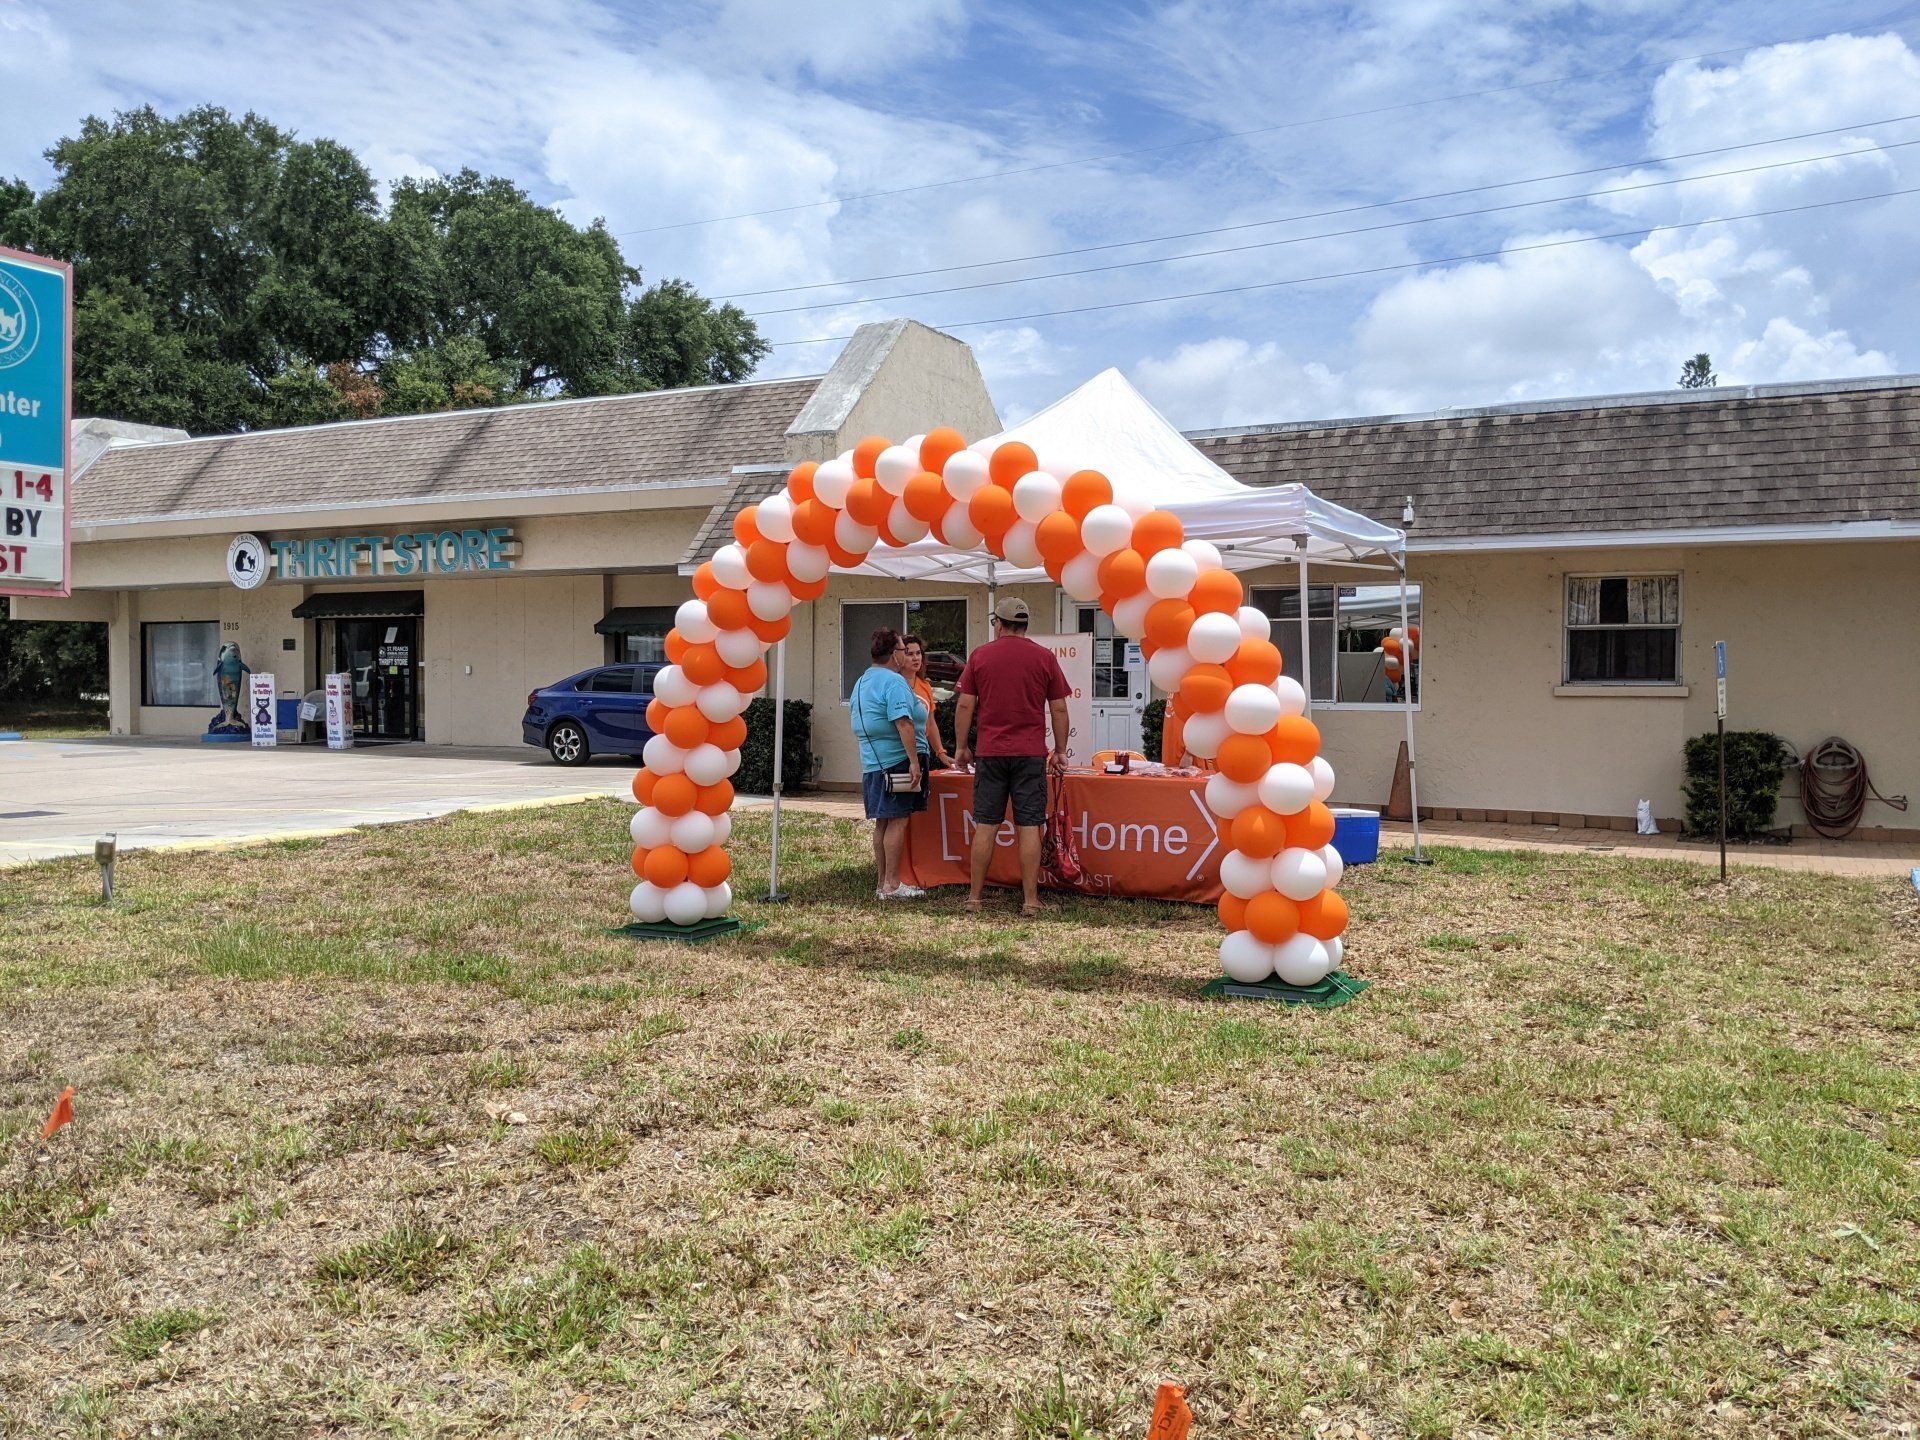 Classic Balloon Arch to attract potential clients